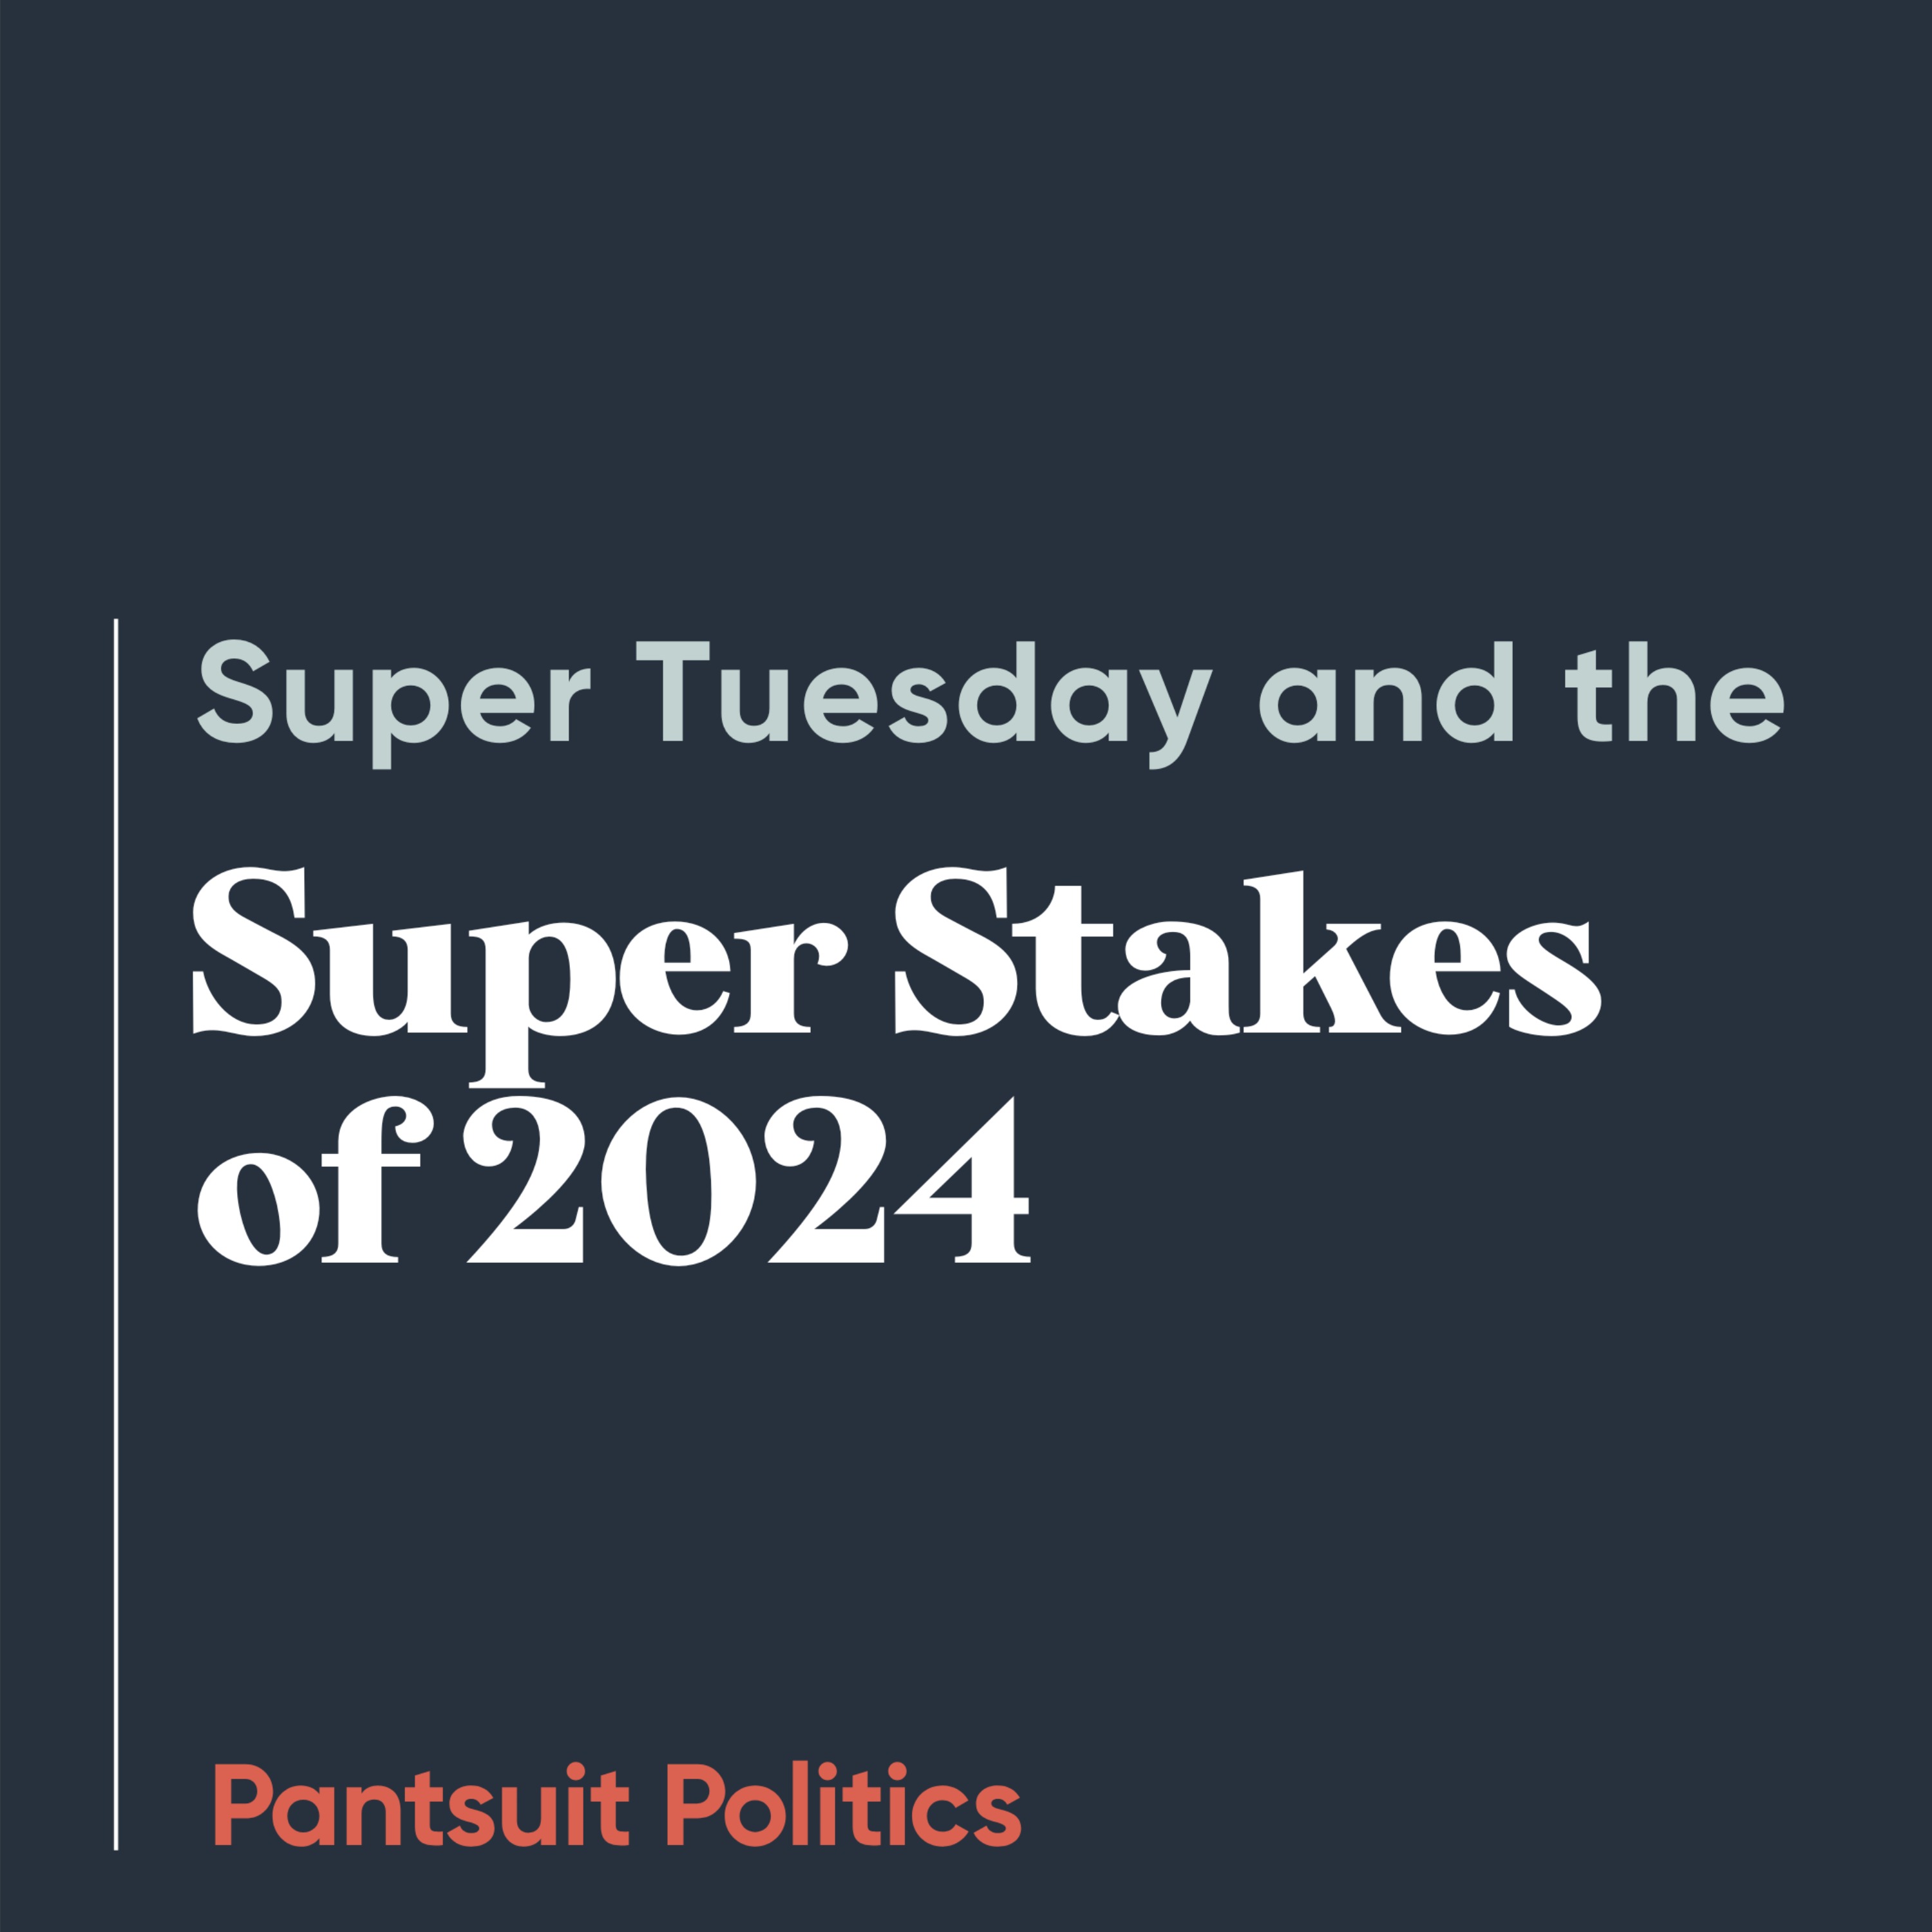 Super Tuesday and the Super Stakes of 2024